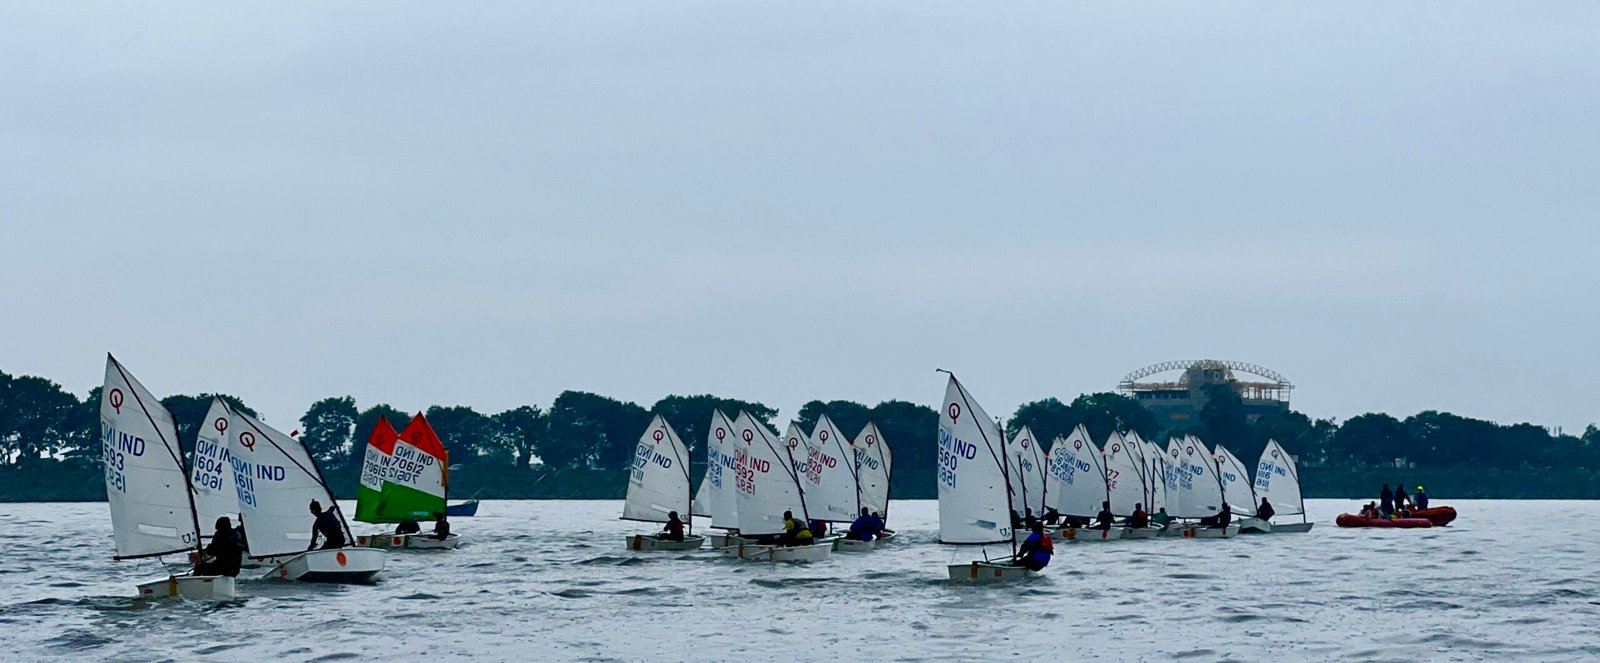 The YAI Monsoon Regatta hosted by the Telangana Sailing Association in collaboration is set to start racing on the 12th morning